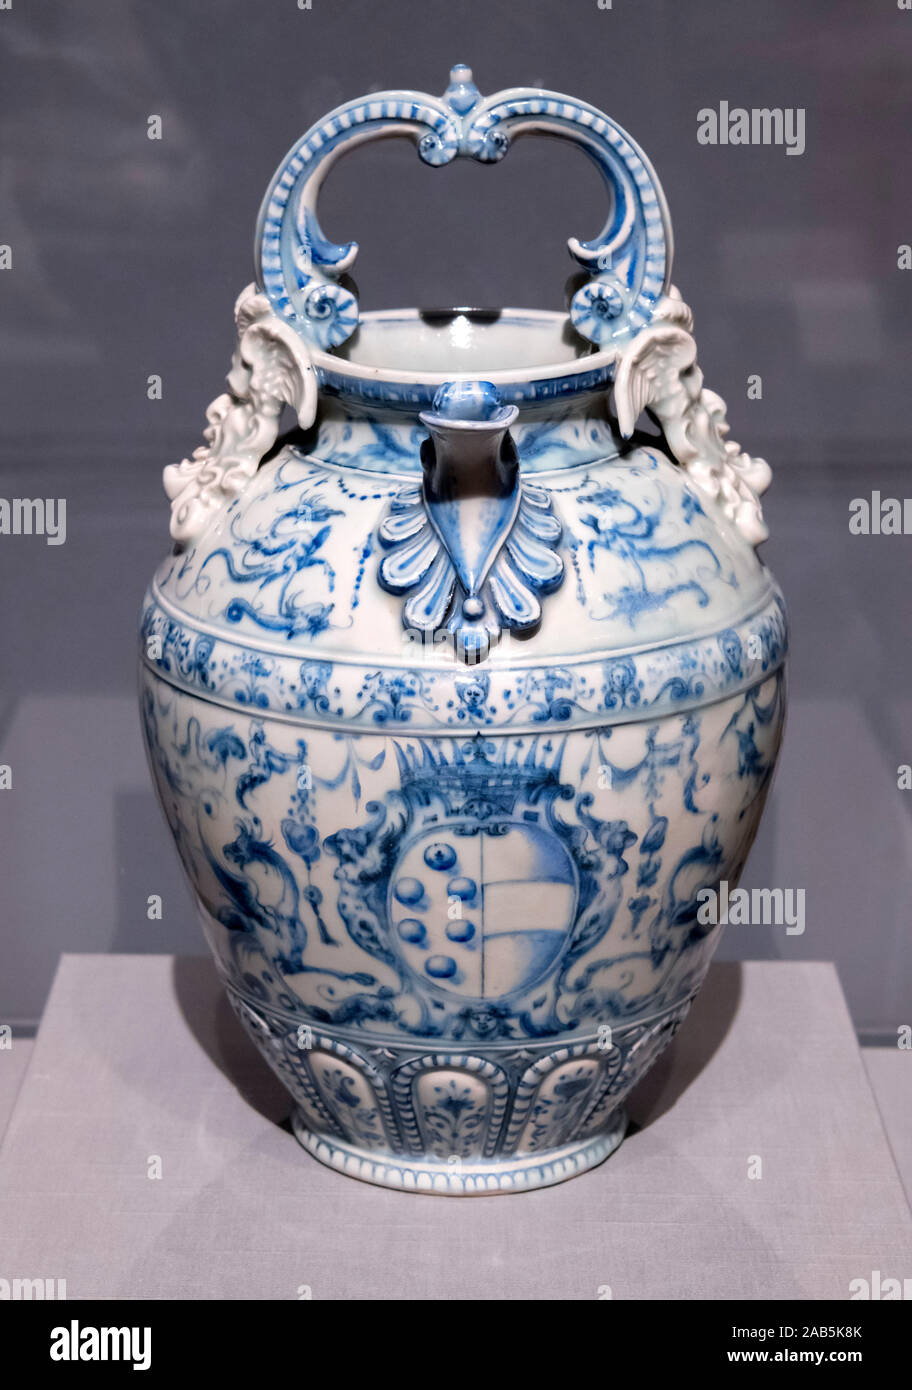 Porcelain Ewer (brocca), Medici Manufactory between 1575 and 1578, soft paste porcelain with blue underglaze and manganese decoration. The ewer is one of the first European made porcelain objects. Stock Photo